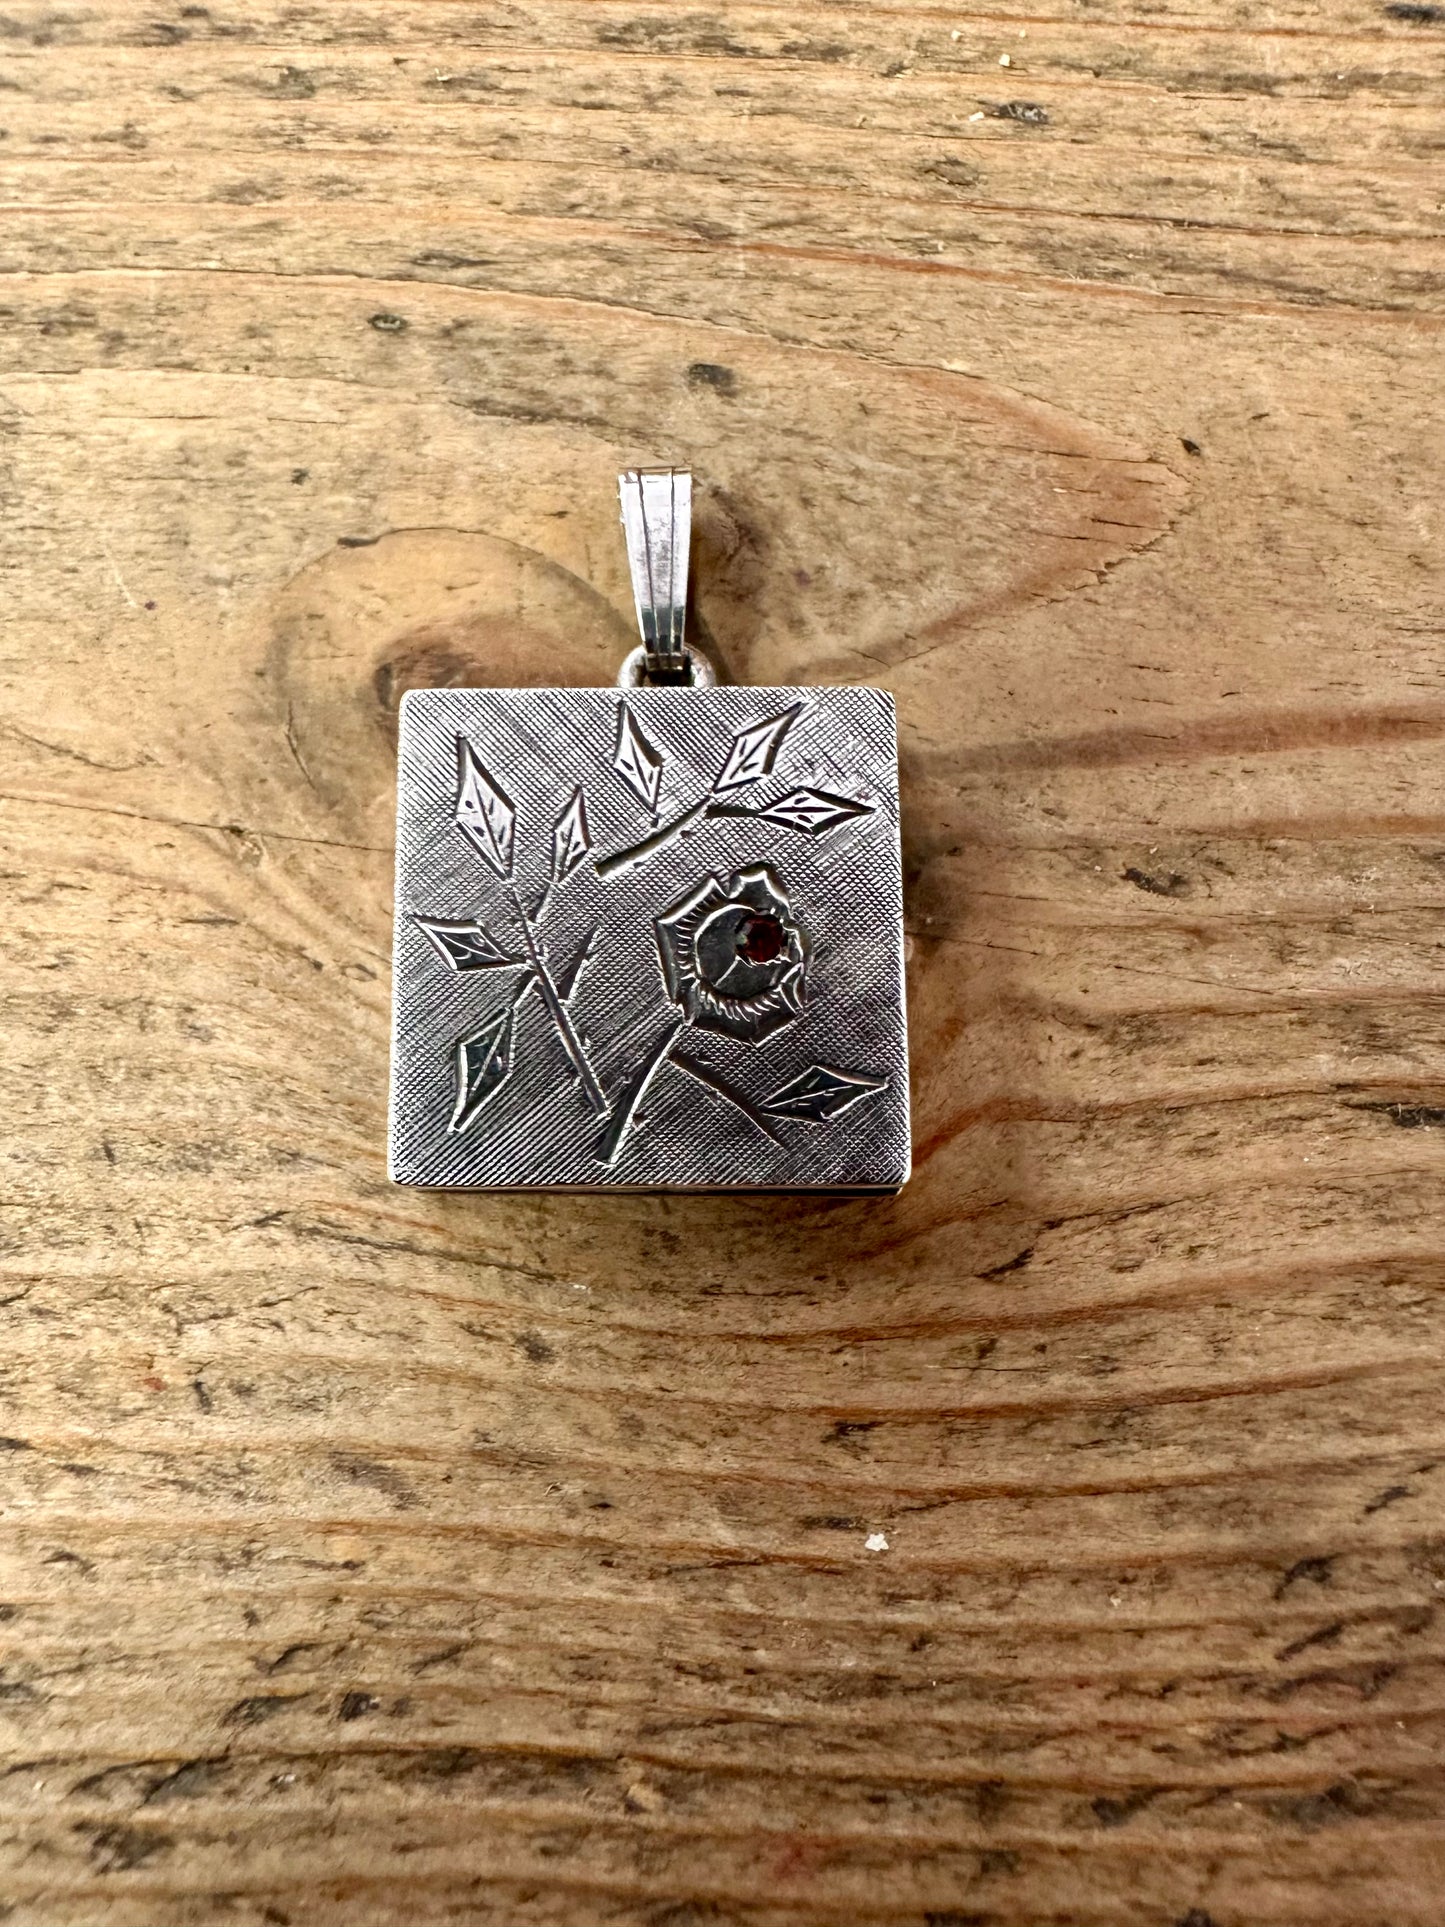 Vintage Square Red Stone Leafs Engraved 925 Silver Locket Pendant